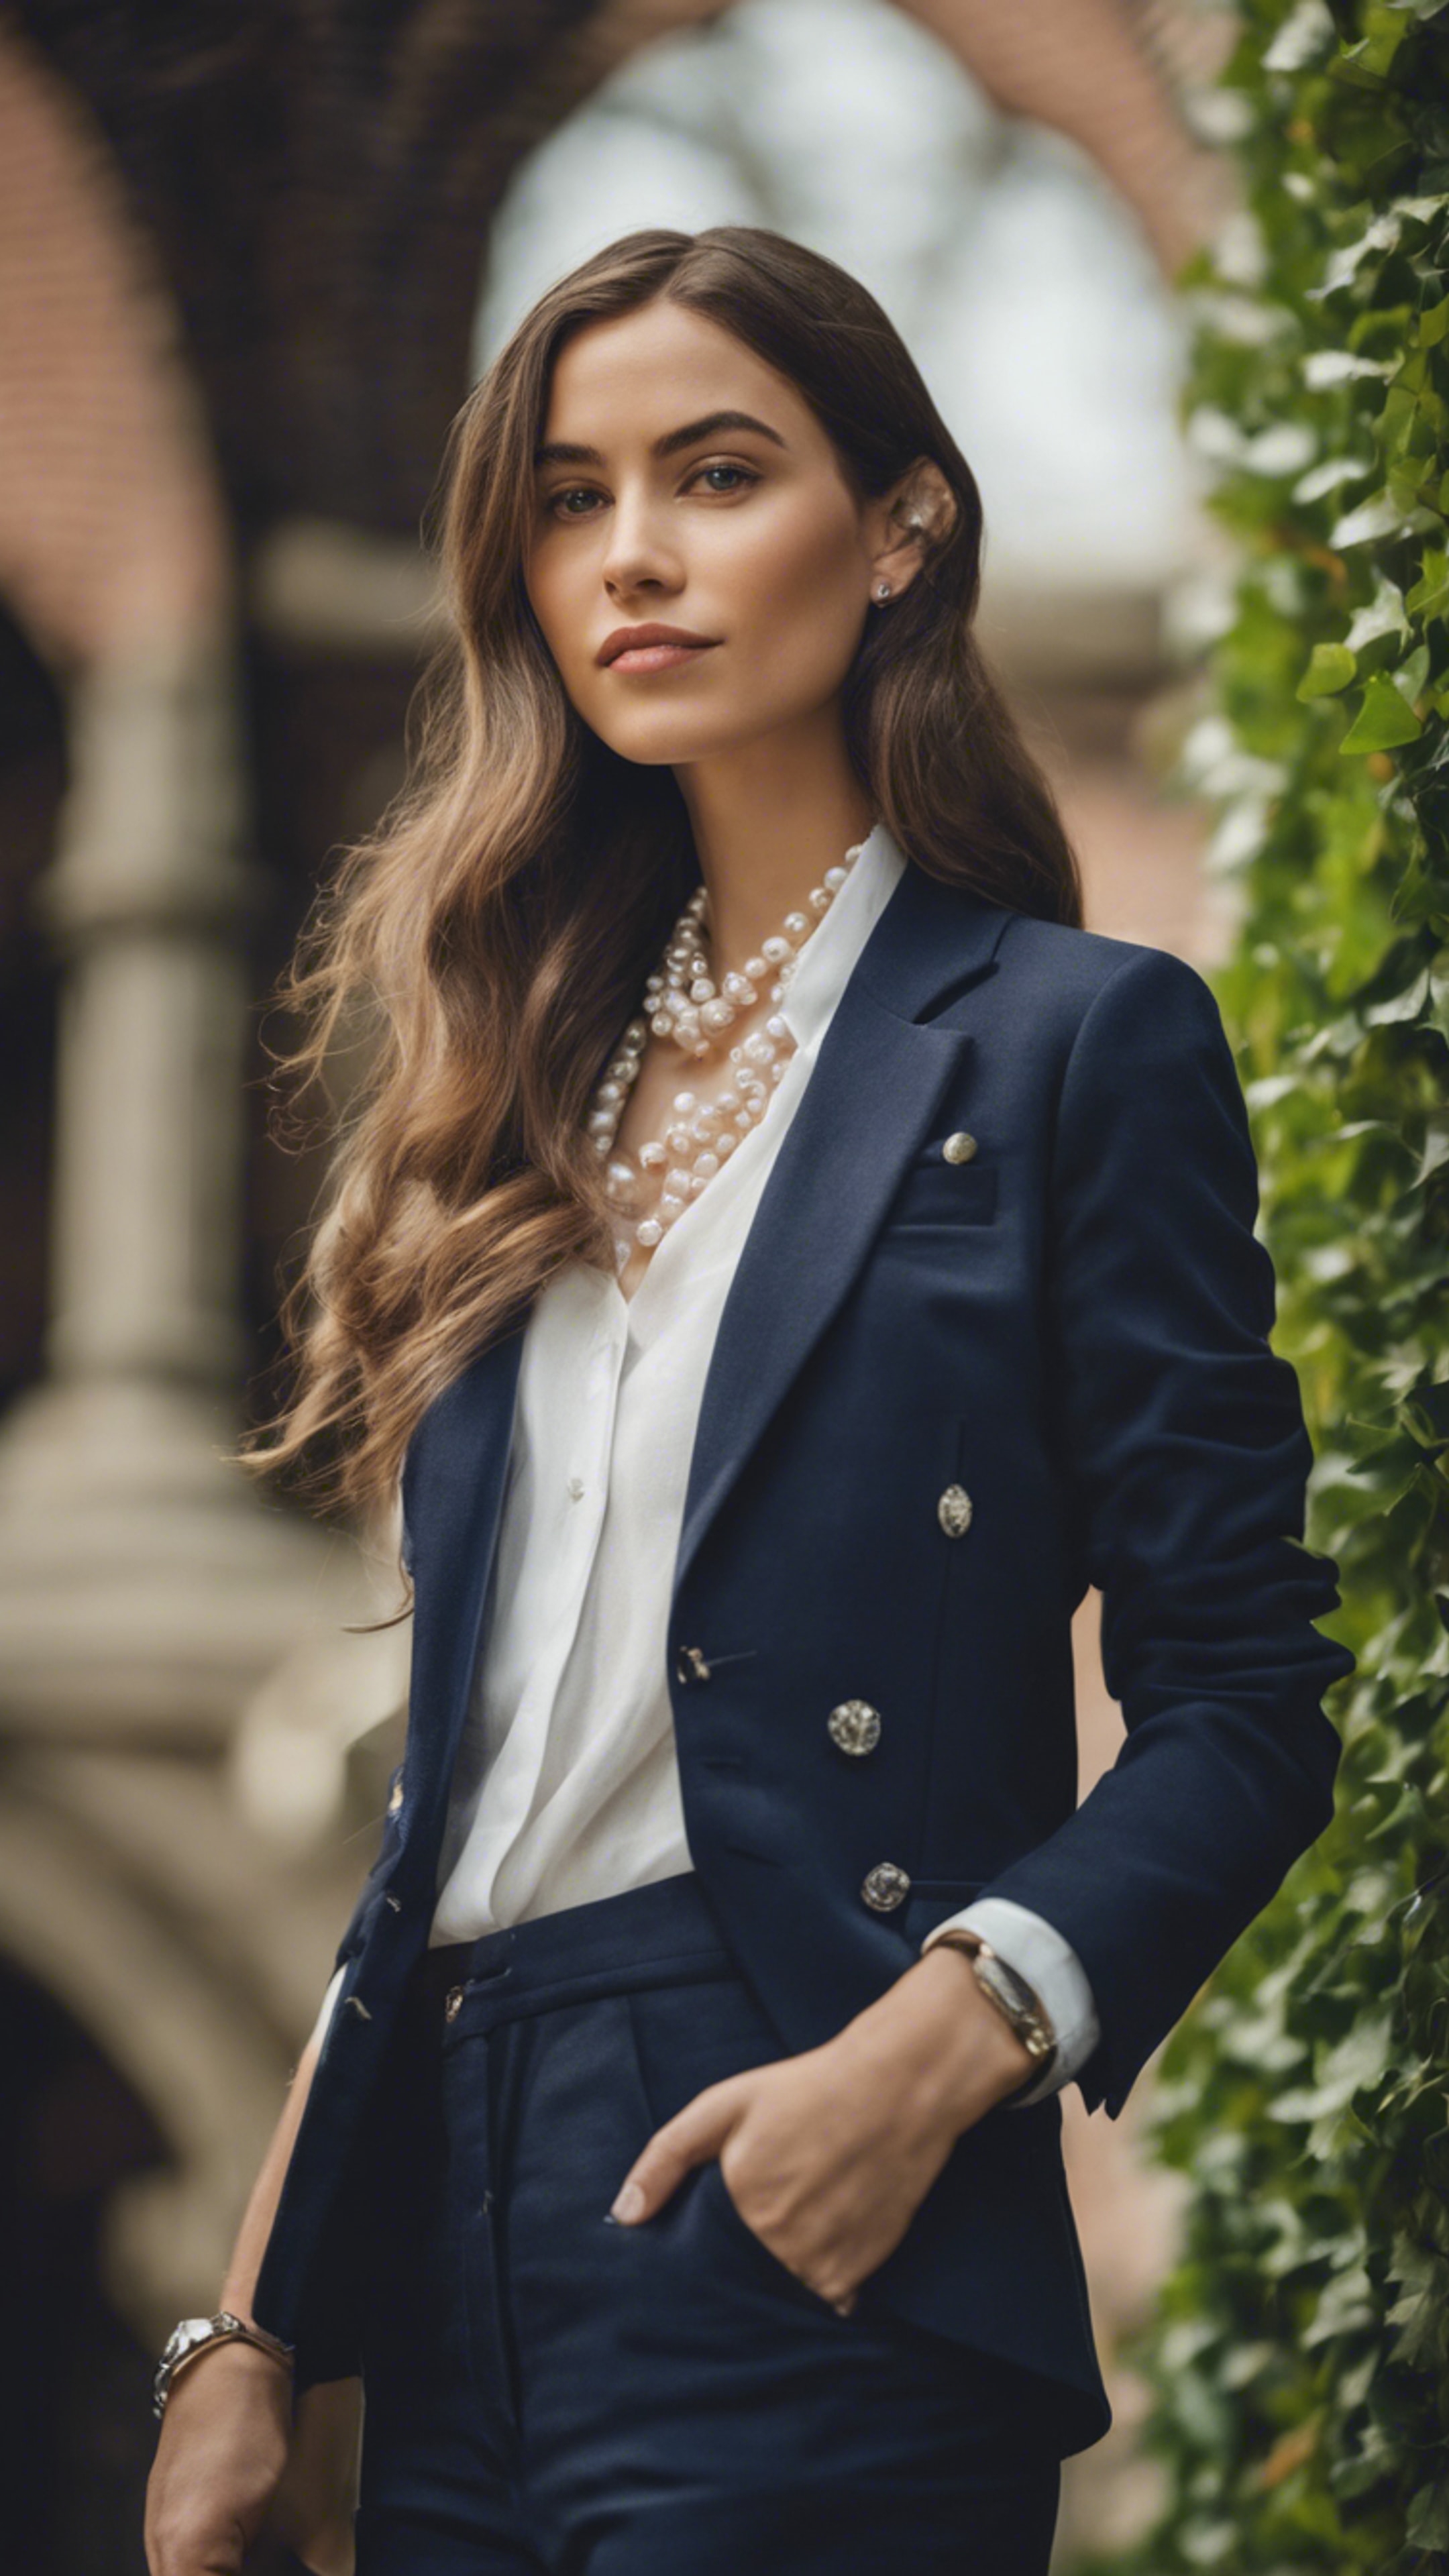 A portrait of a preppy woman in a navy blue blazer, pearl necklace, and a white linen shirt, posing in an Ivy League campus. Tapet[1775f808339c45cb81cf]